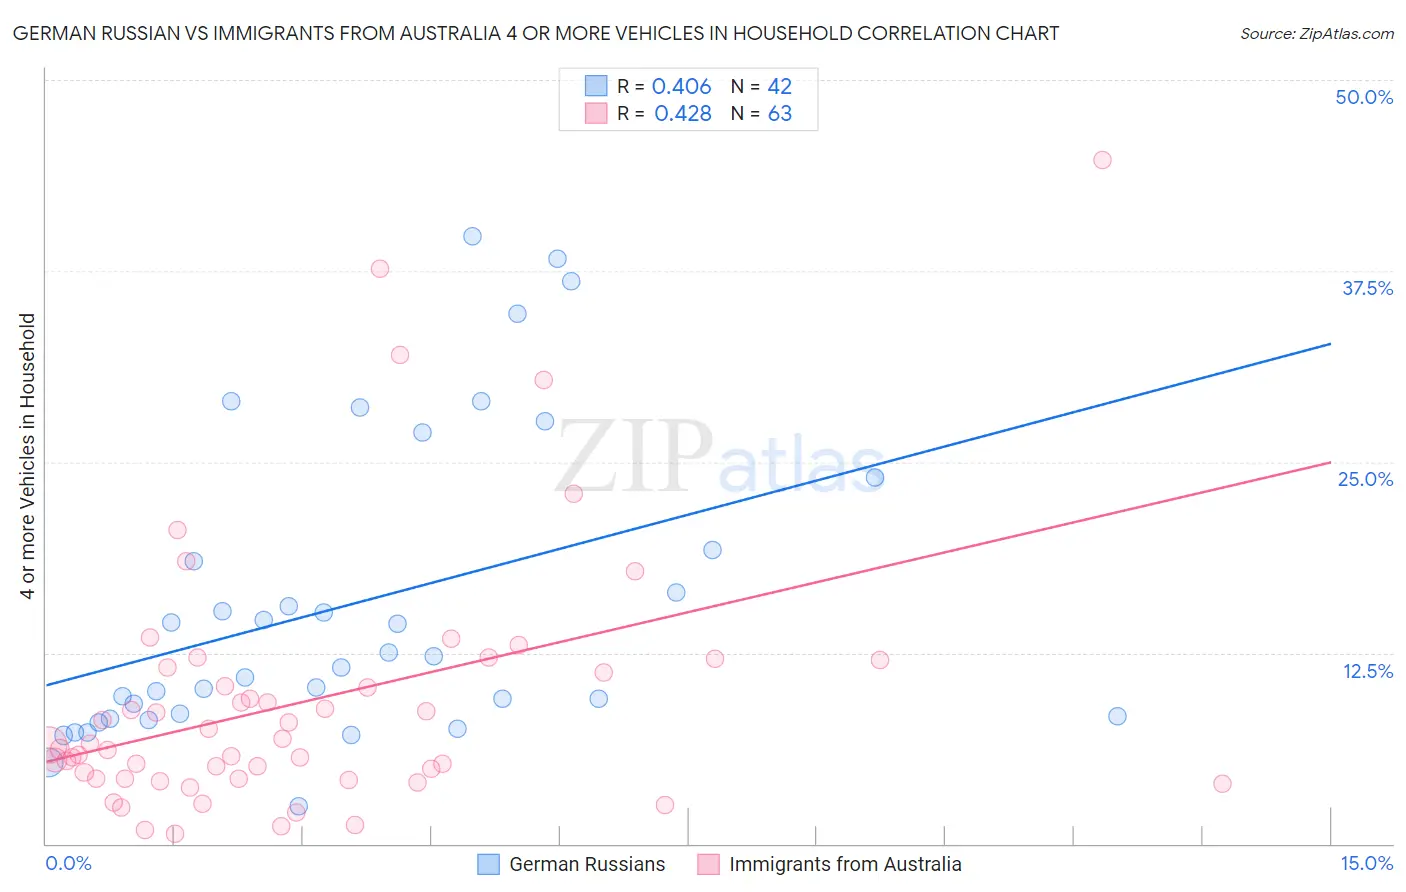 German Russian vs Immigrants from Australia 4 or more Vehicles in Household